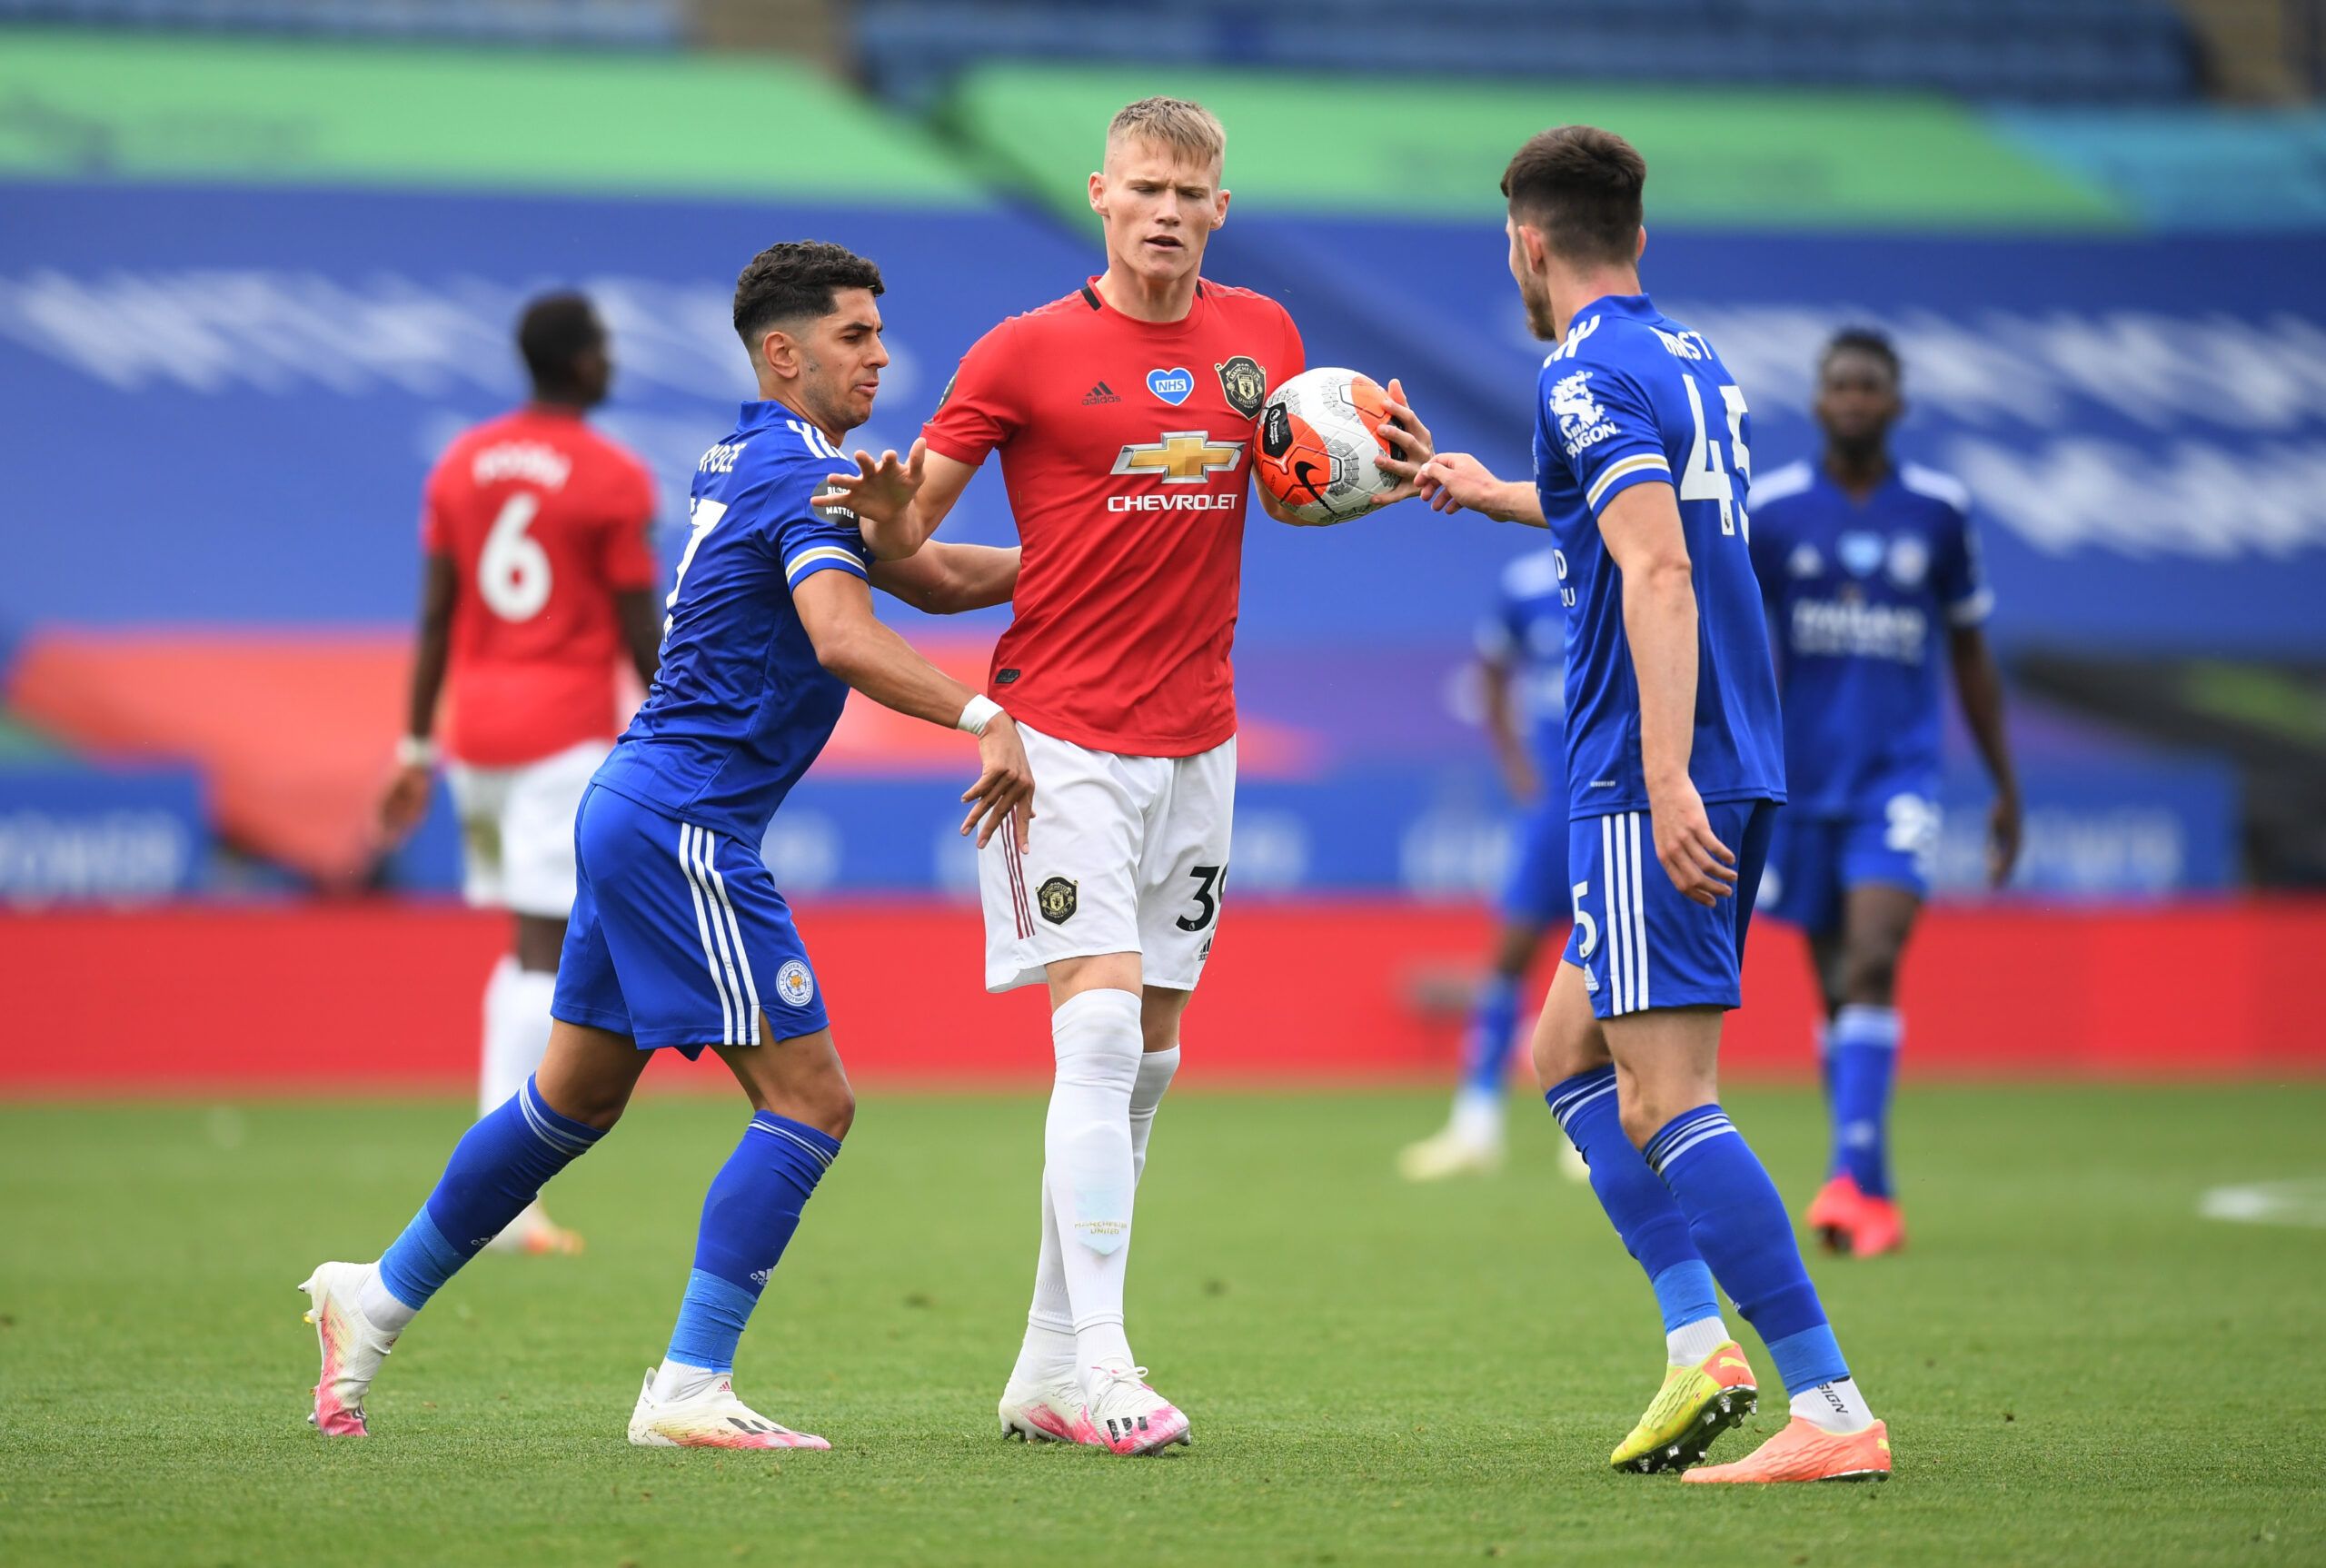 Soccer Football - Premier League - Leicester City v Manchester United - King Power Stadium, Leicester, Britain - July 26, 2020  Manchester United's Scott McTominay with Leicester City's Ayoze Perez and George Hirst, as play resumes behind closed doors following the outbreak of the coronavirus disease (COVID-19) Pool via REUTERS/Michael Regan EDITORIAL USE ONLY. No use with unauthorized audio, video, data, fixture lists, club/league logos or 'live' services. Online in-match use limited to 75 imag